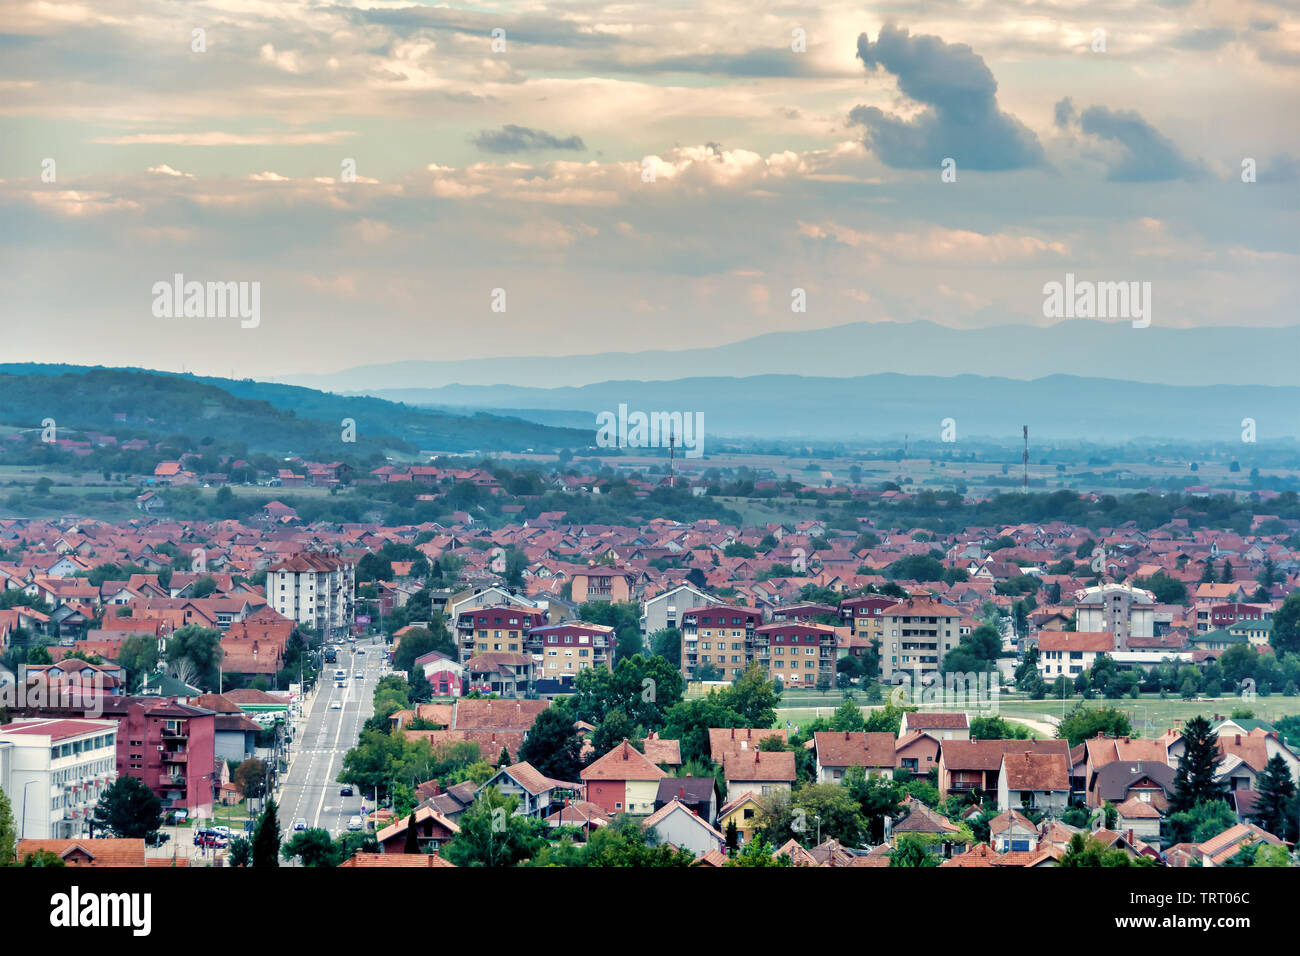 East side of the City of Paracin in central east Serbia seen from the hill called Karadjordjevo Brdo. Stock Photo